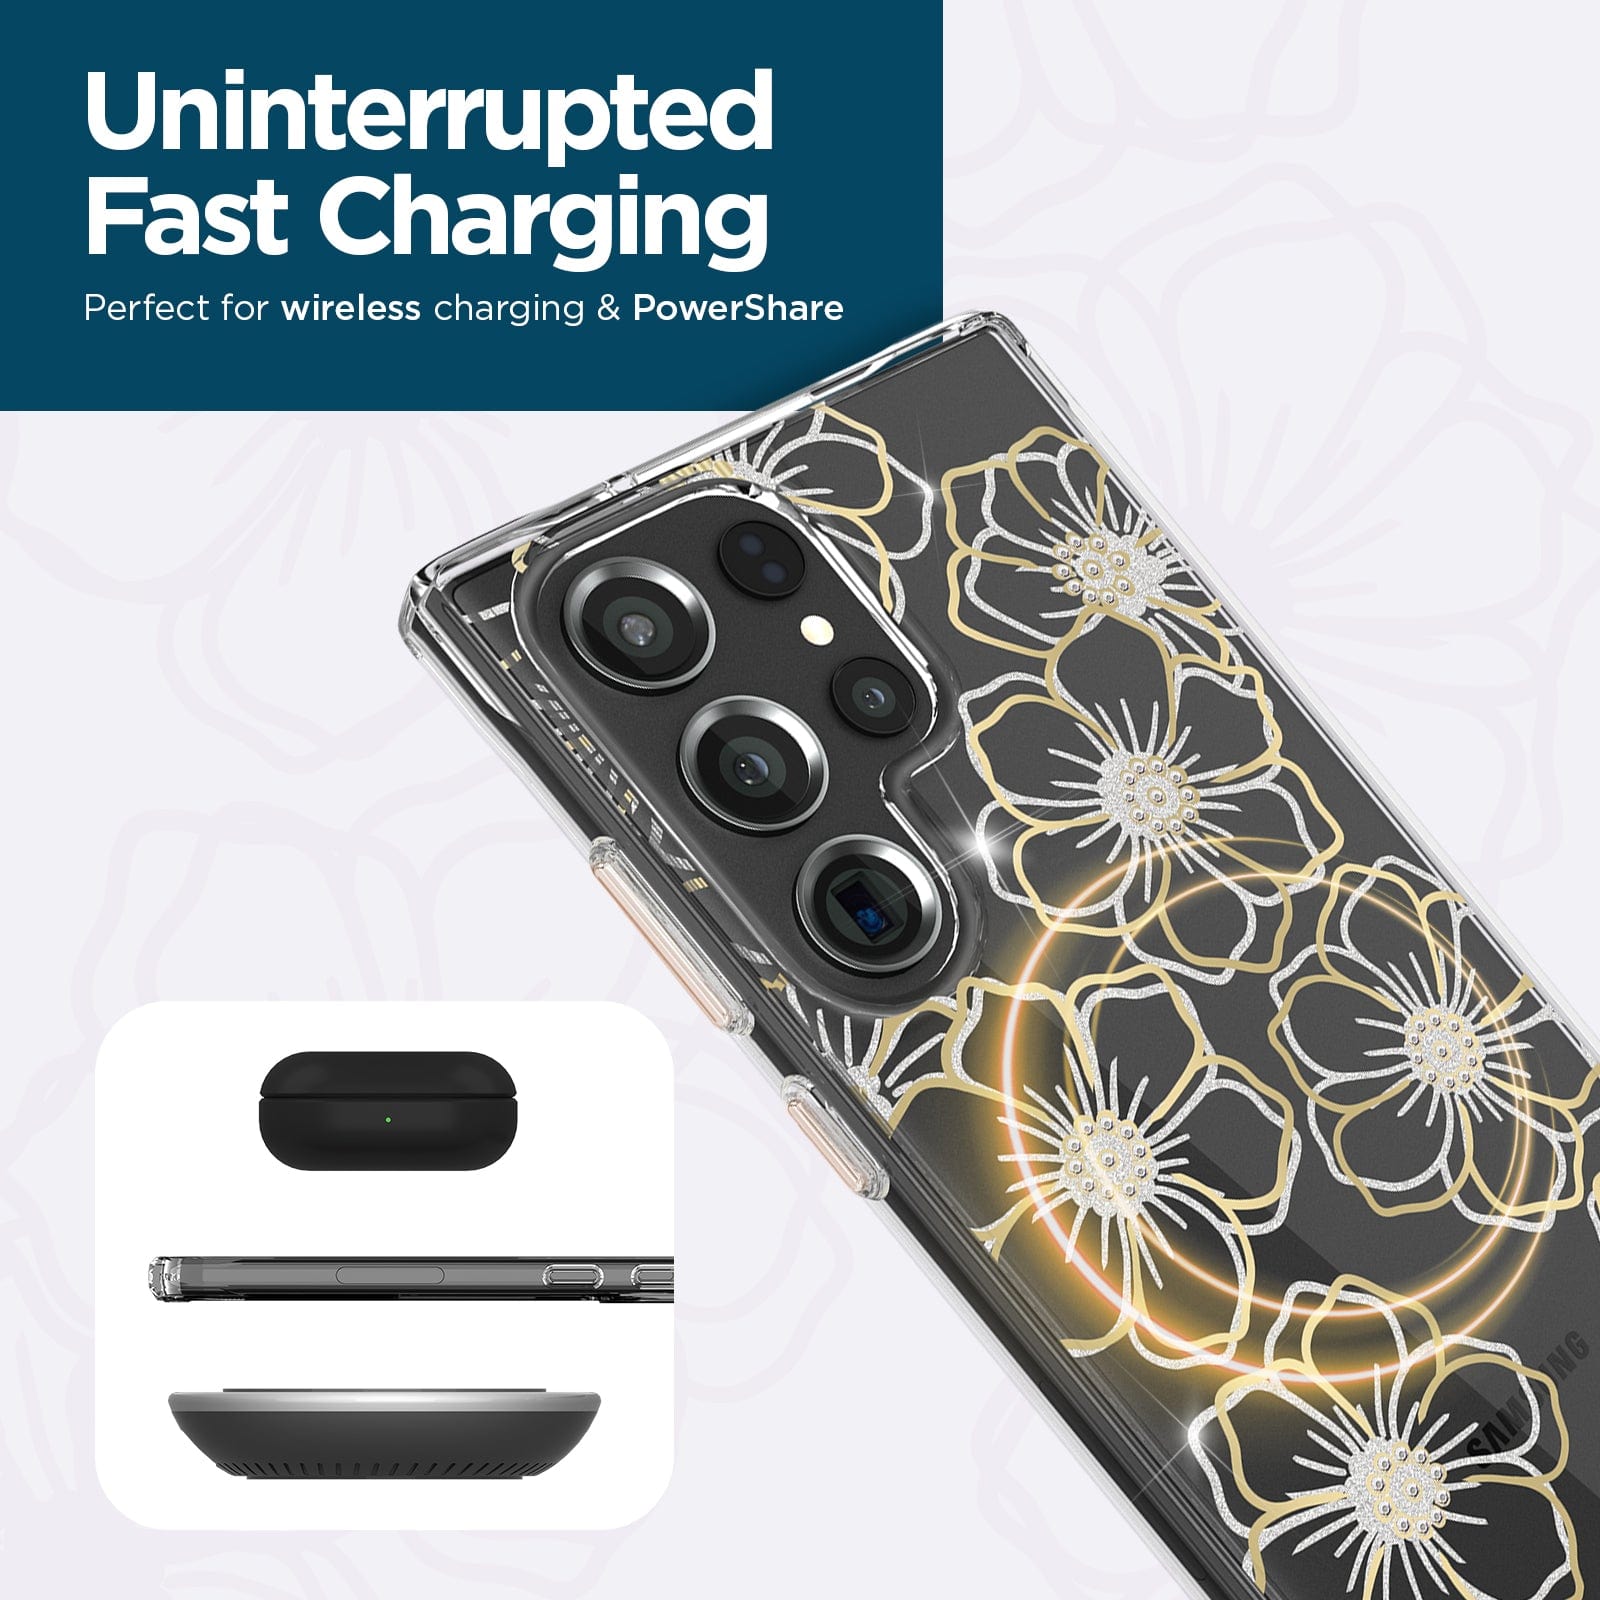 UNINTERRUPTED FAST CHARGING. PERFECT FOR WIRELESS CHARGING & POWERSHARE. 